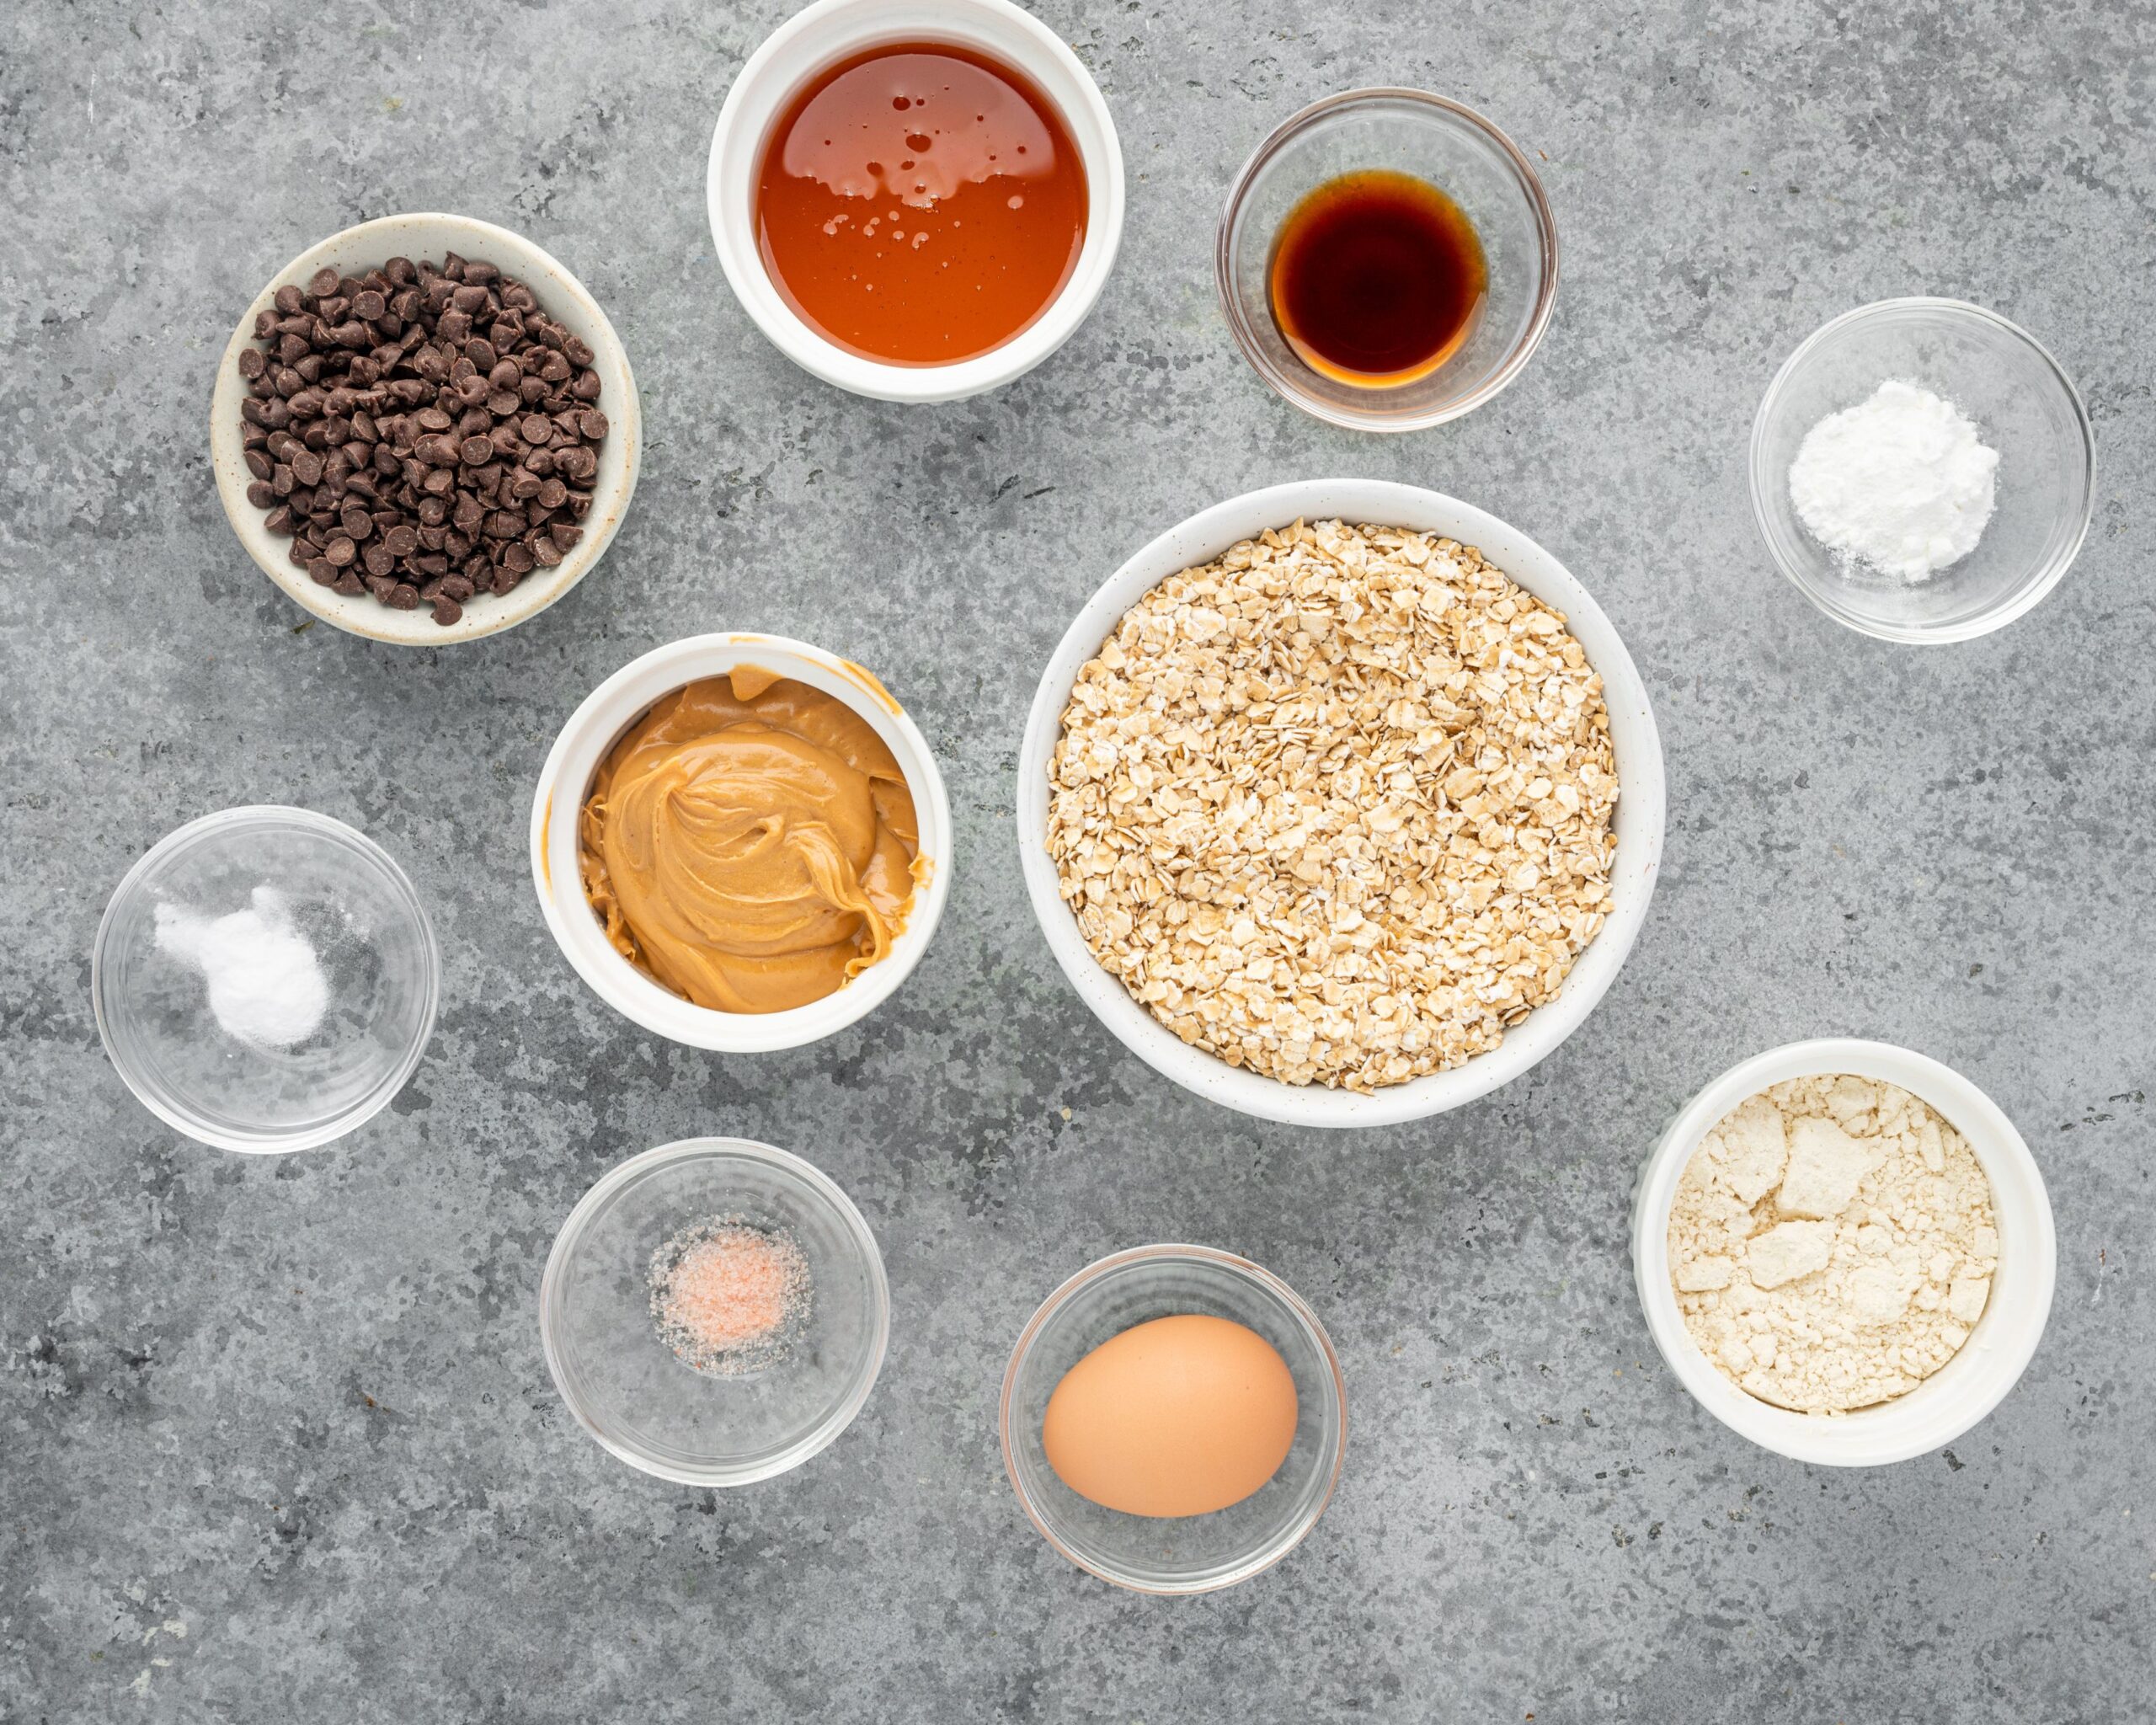 Ingredients for making oatmeal protein cookies divided into small bowls.